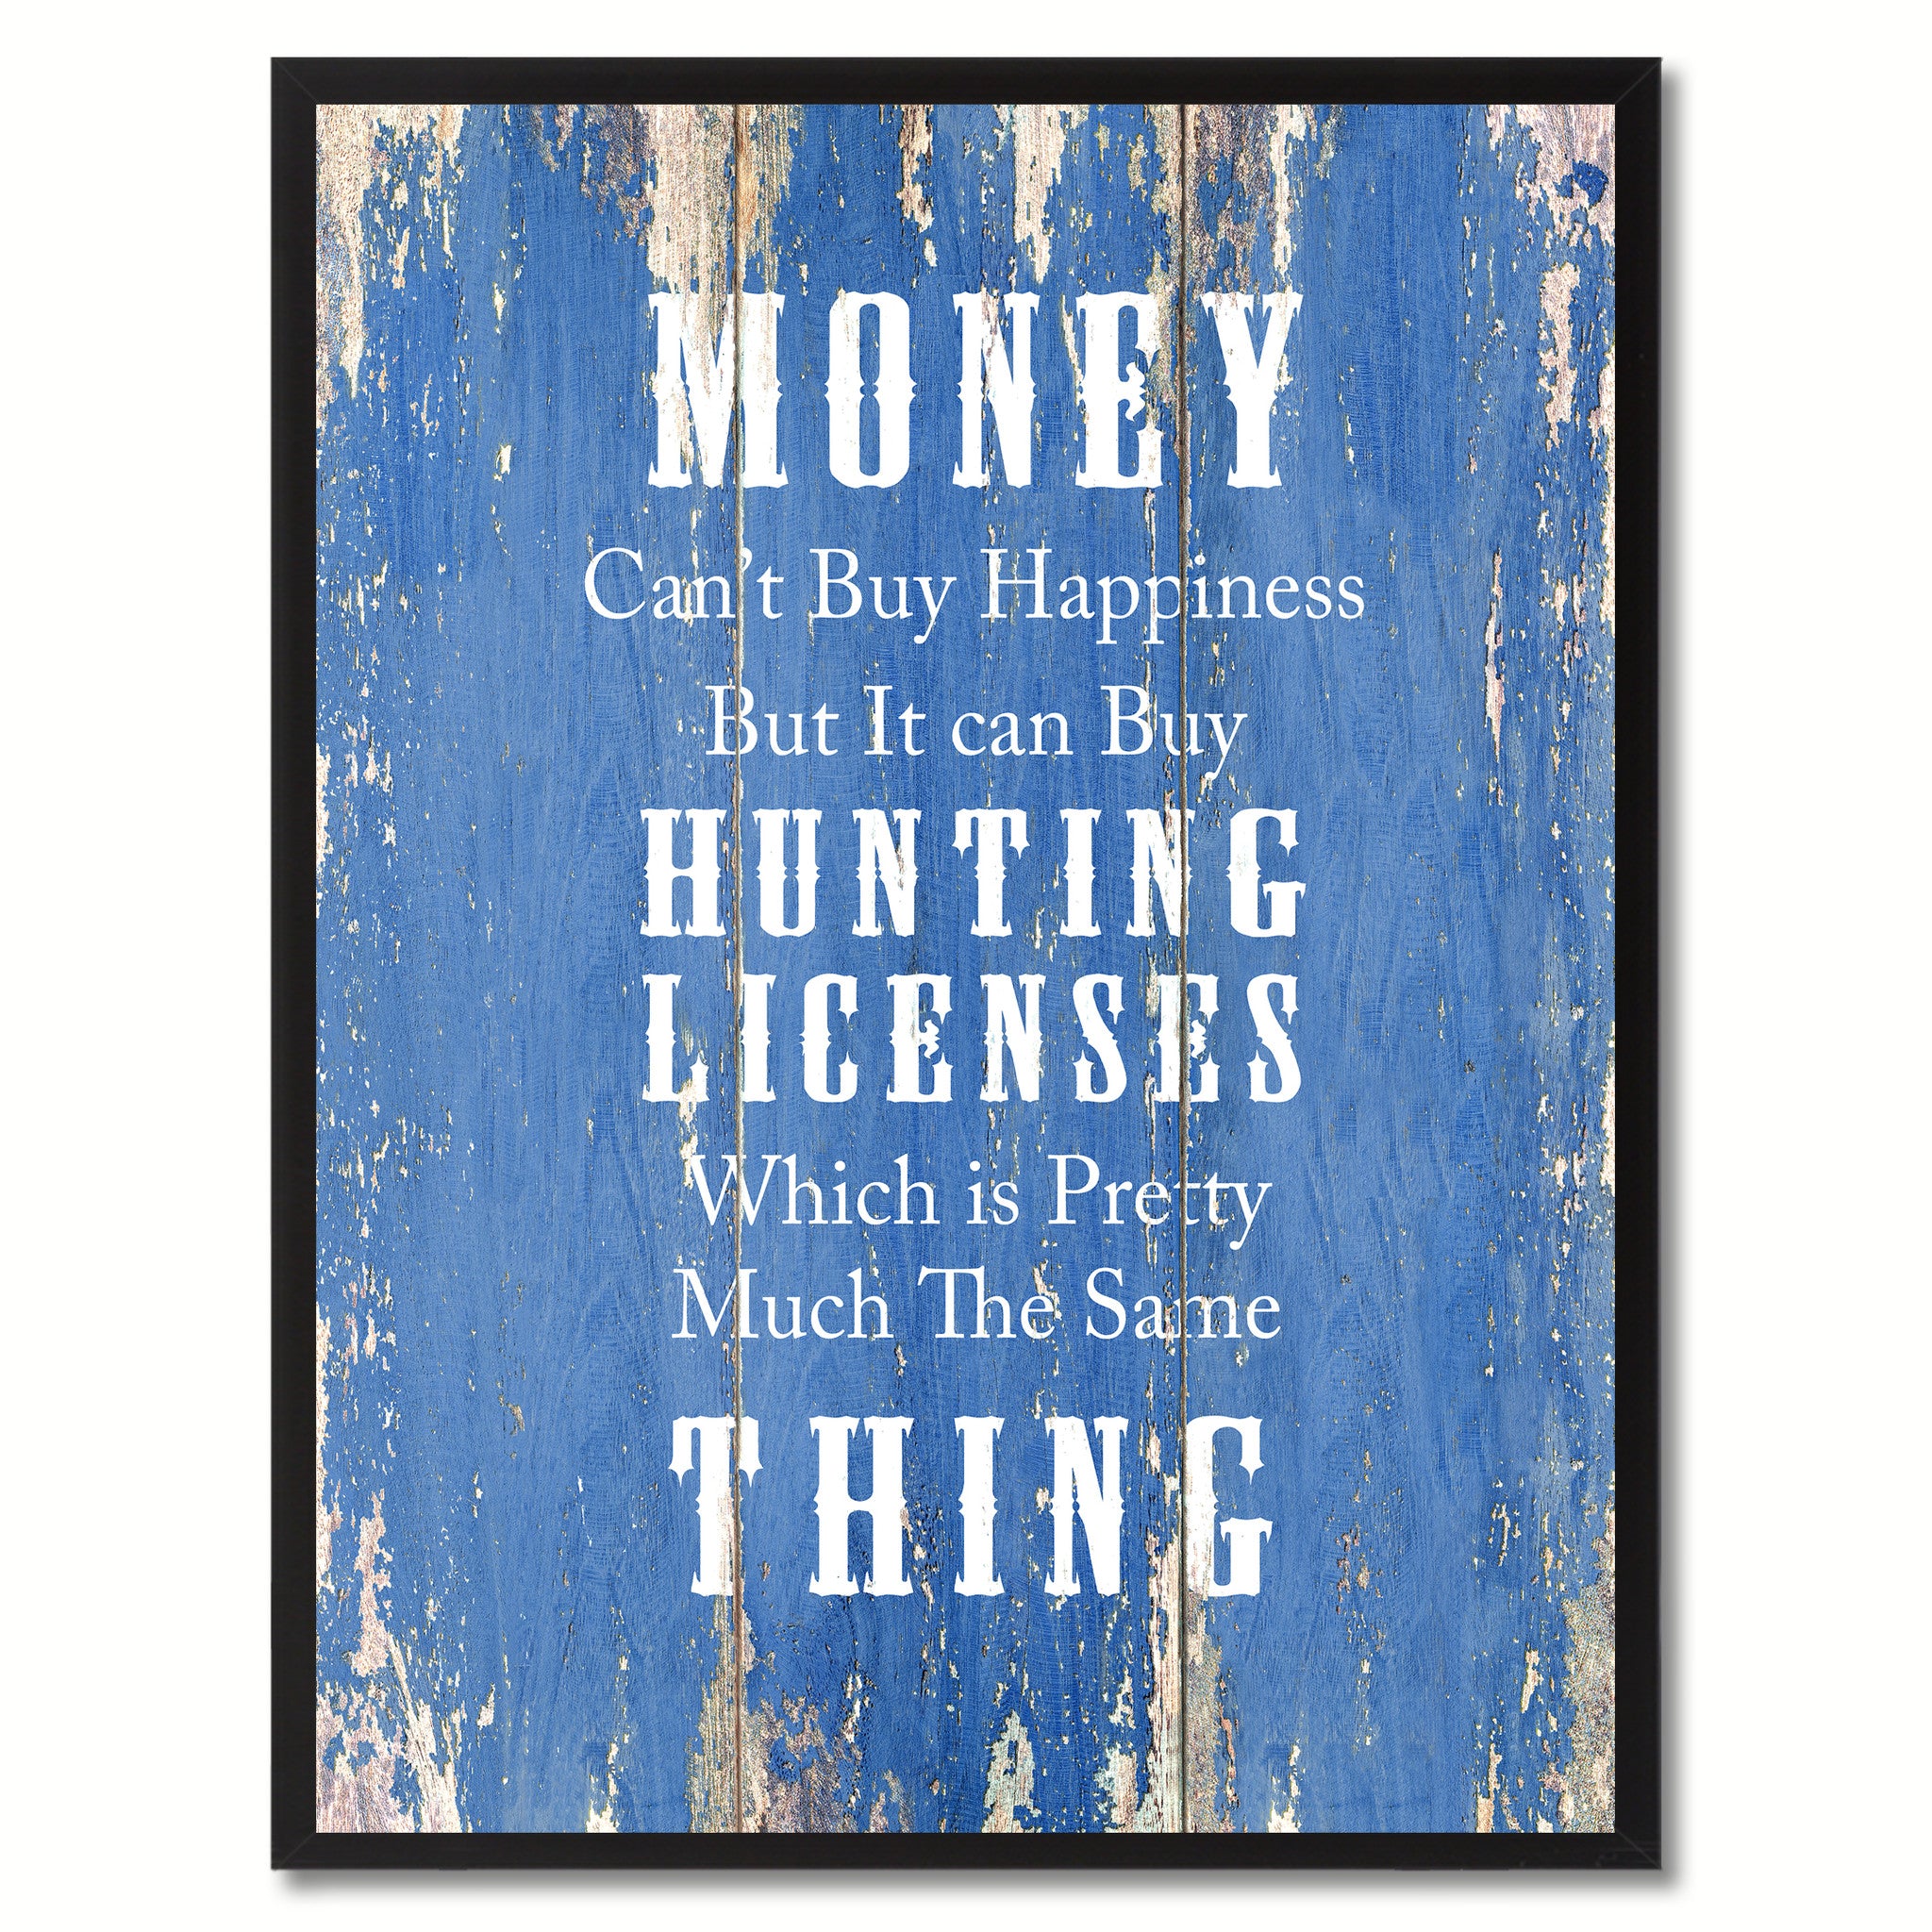 Money Can't Buy Happiness Saying Canvas Print, Black Picture Frame Home Decor Wall Art Gifts